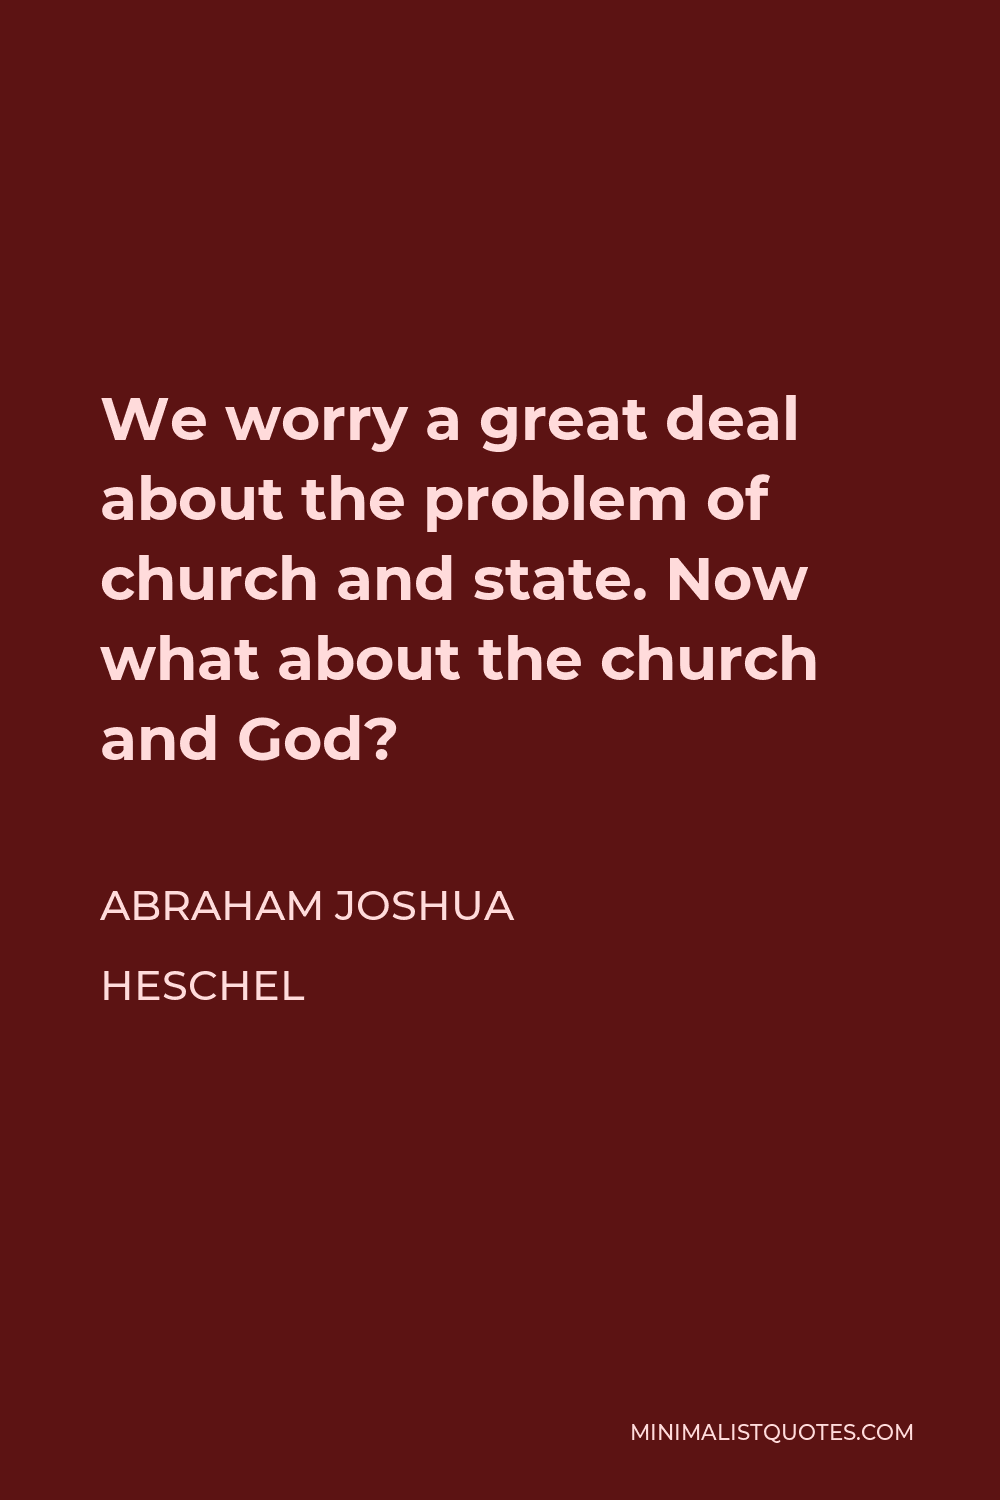 Abraham Joshua Heschel Quote - We worry a great deal about the problem of church and state. Now what about the church and God?